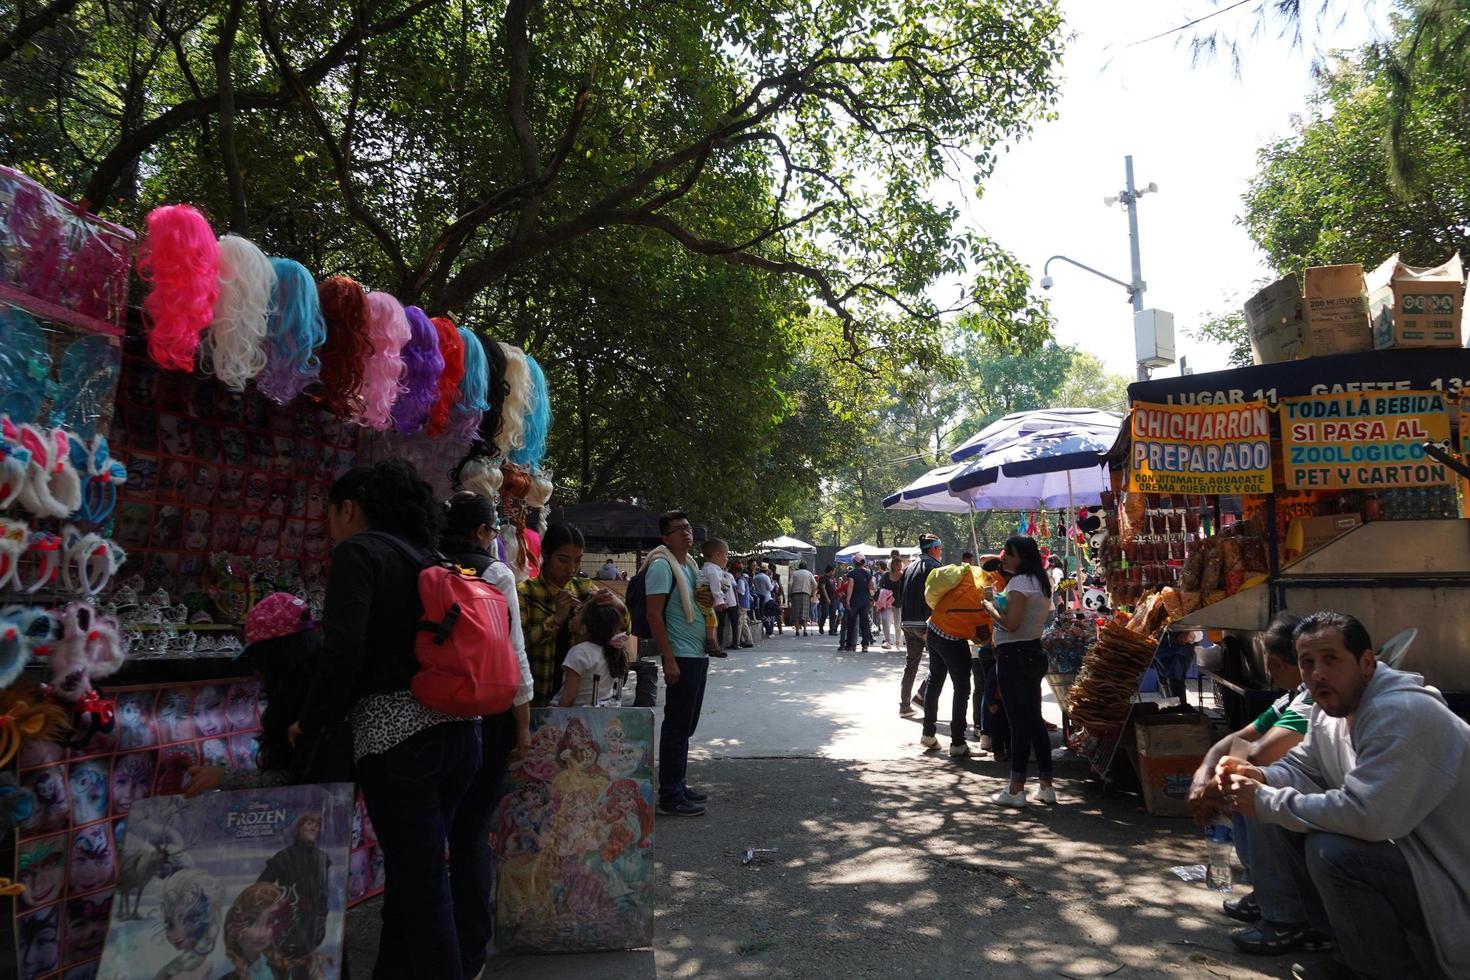 MEXICO CITY, FEBRUARY 3 2019 - Town park Chapultepec crowded of people on sunday photo